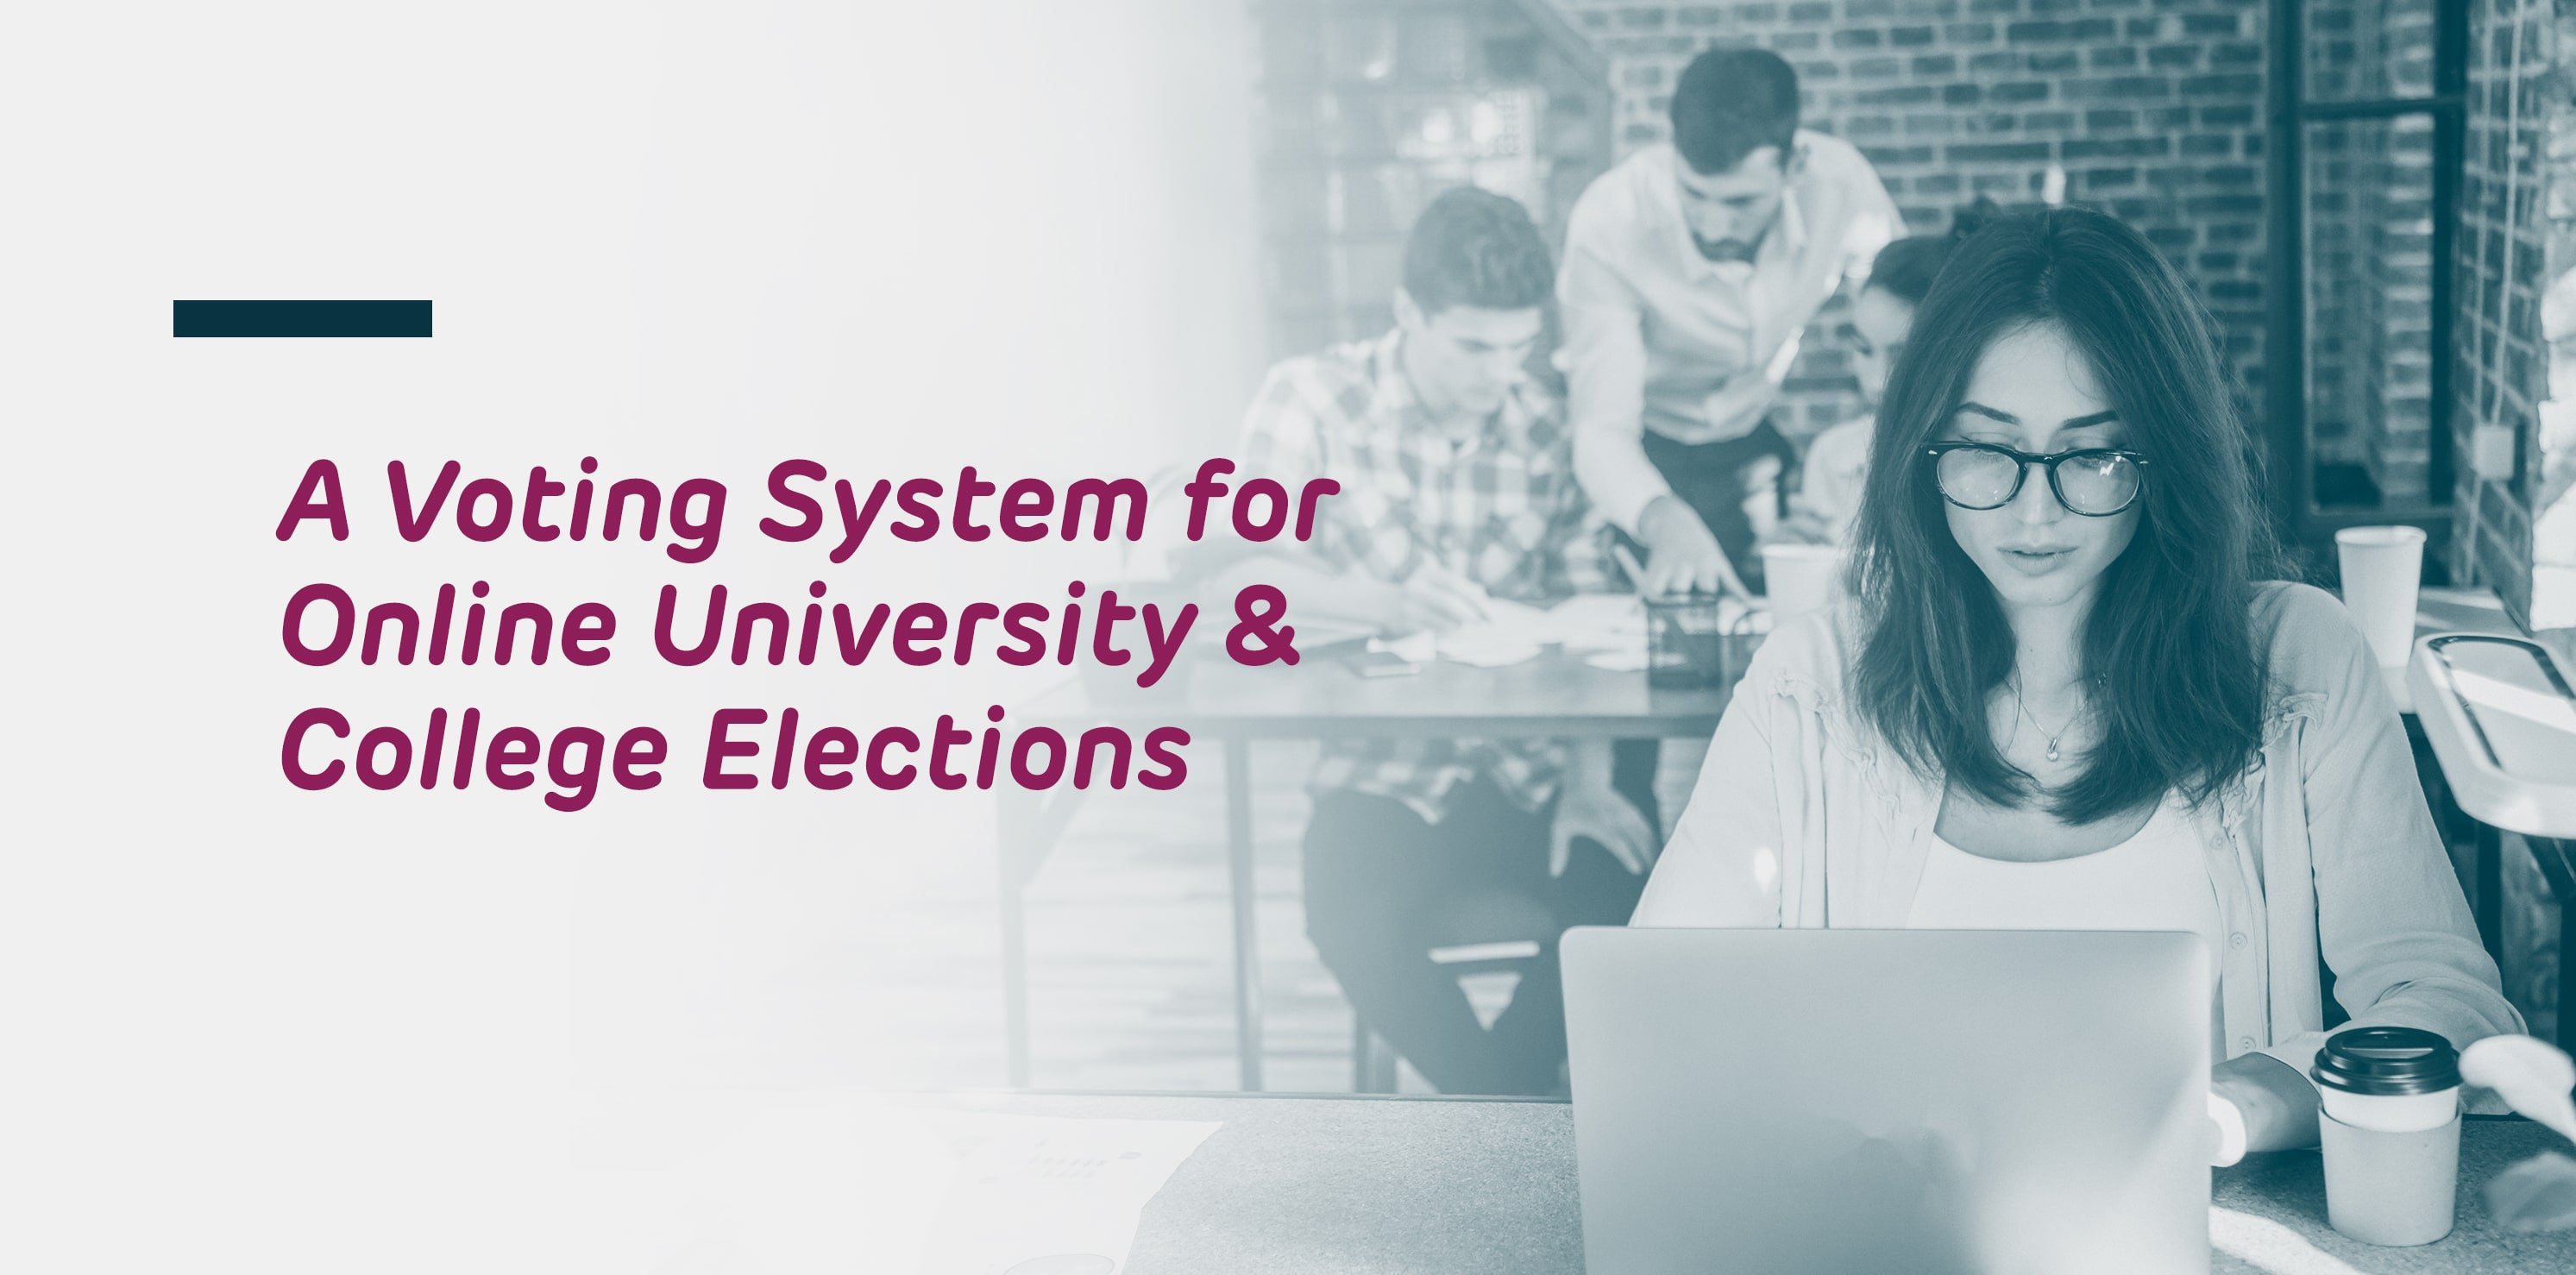 A Voting System for Online University & College Elections